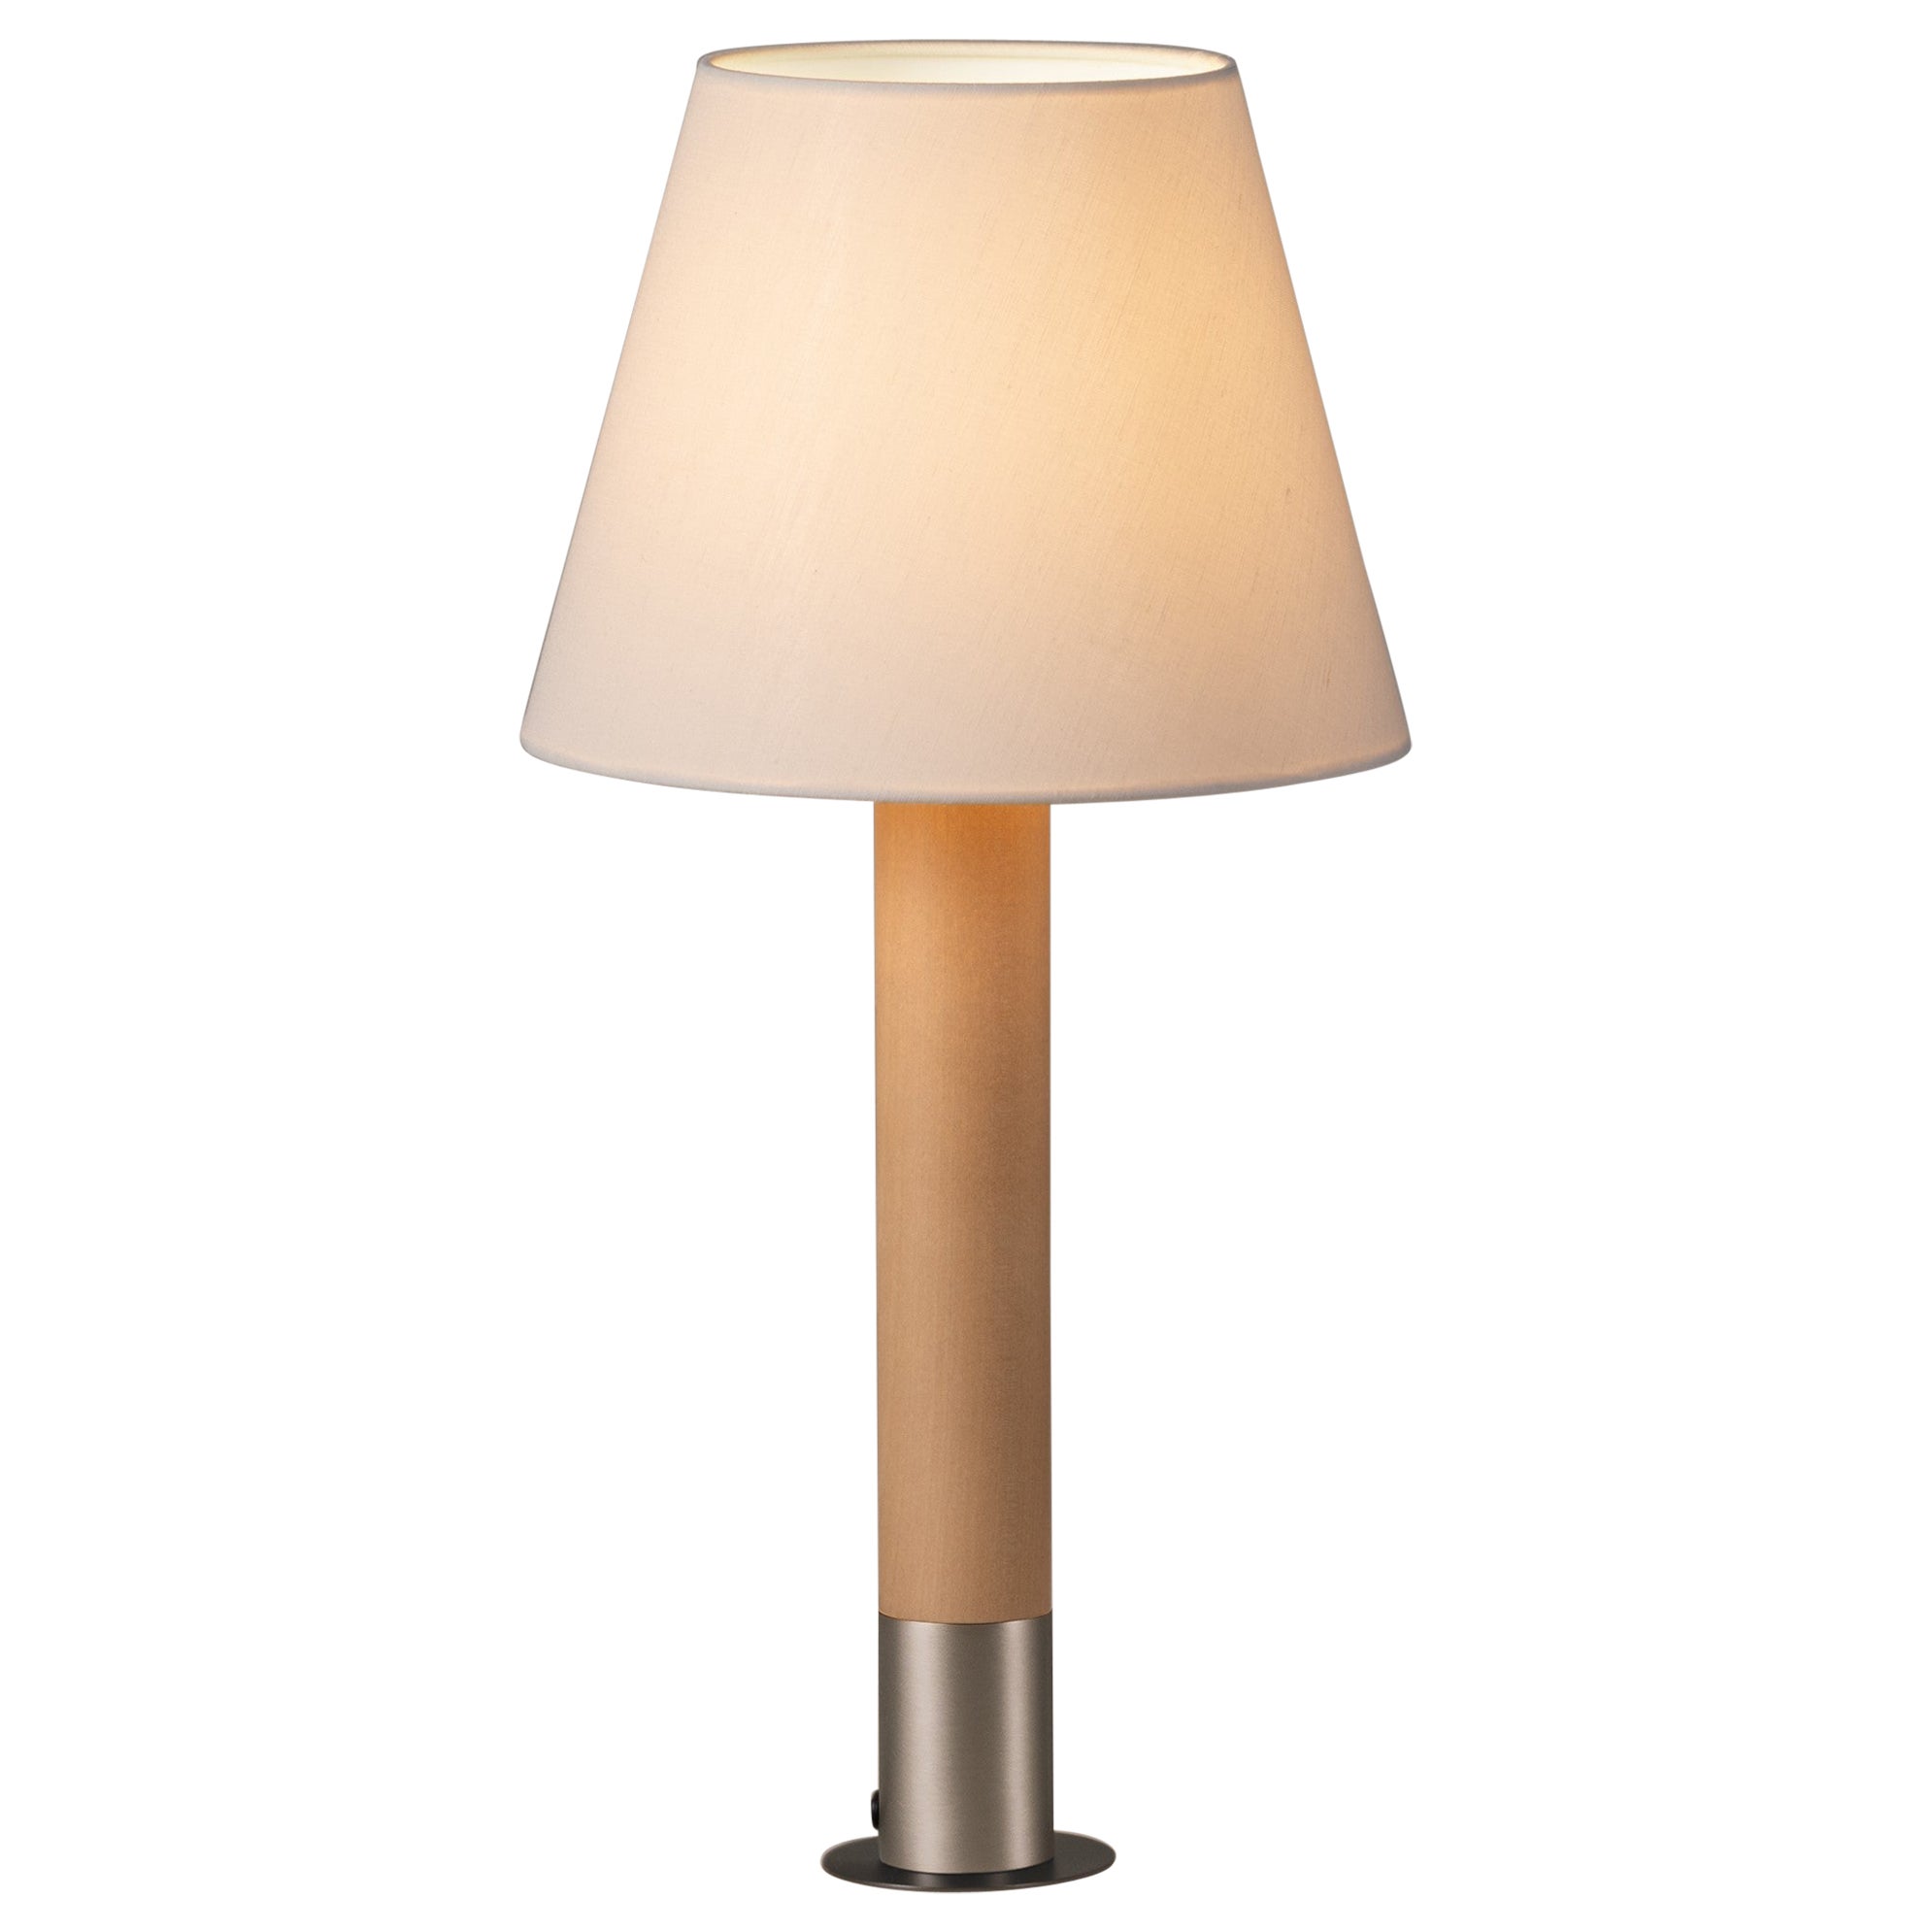 Nickel and White Básica M1 Table Lamp by Santiago Roqueta, Santa & Cole For Sale